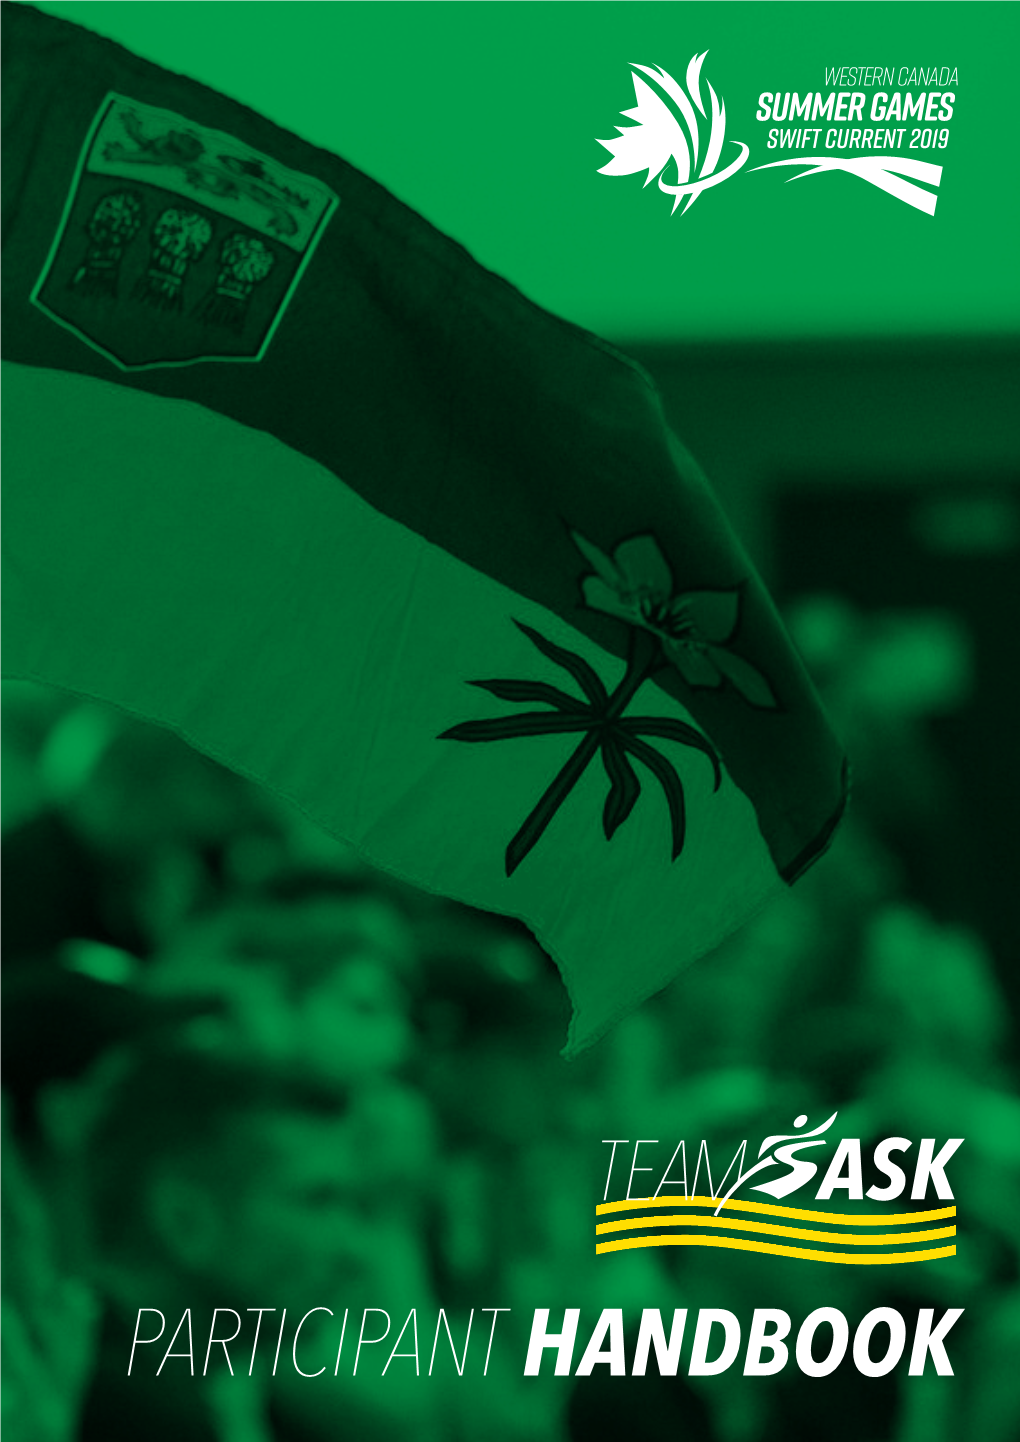 Participant Handbook Welcome to Team Sask Table of Contents